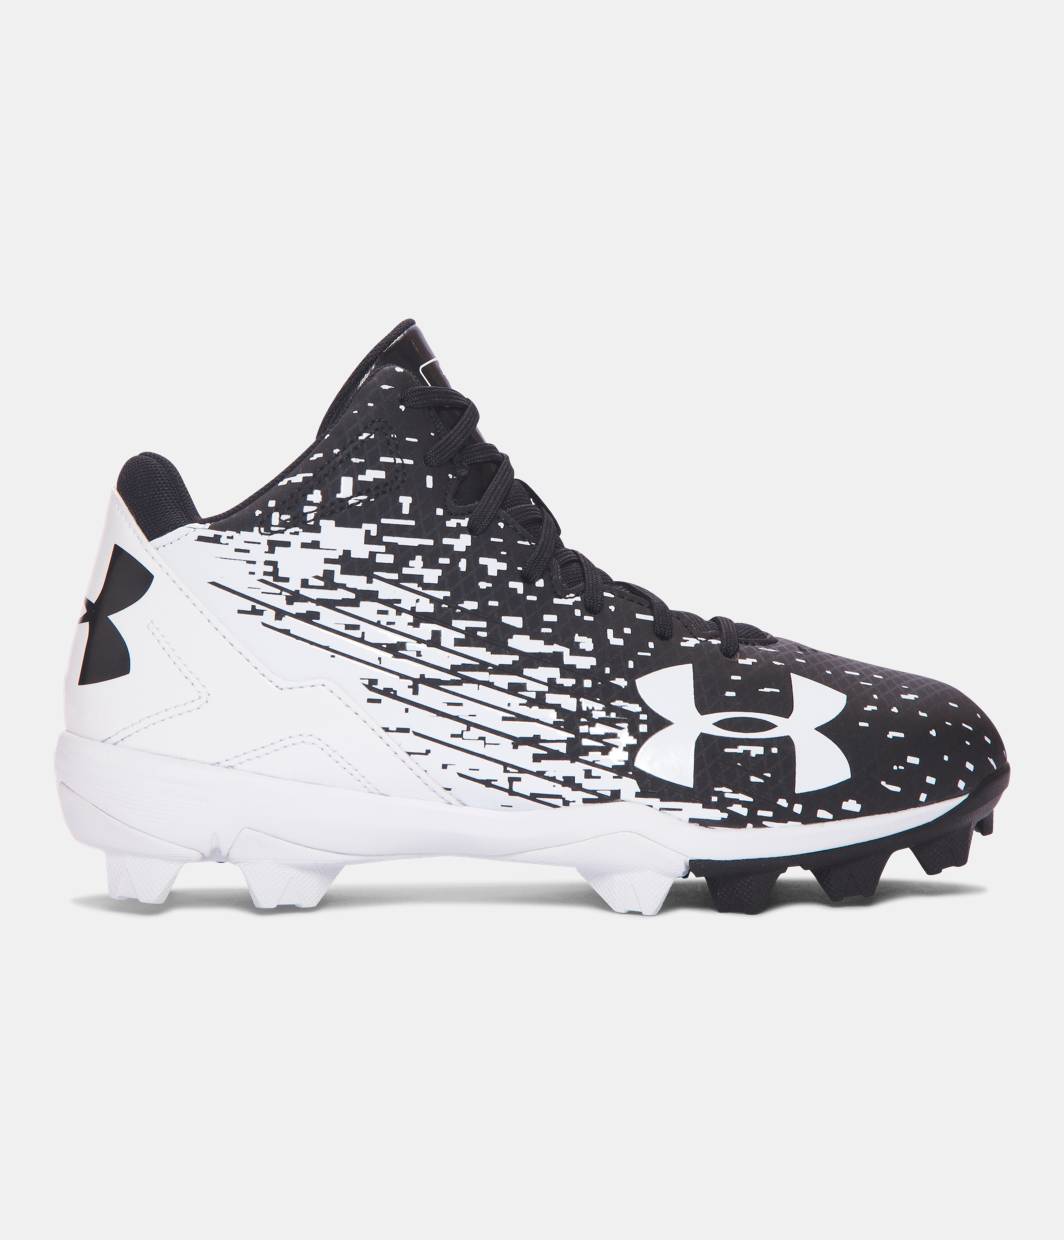 My Under Armour Cleats